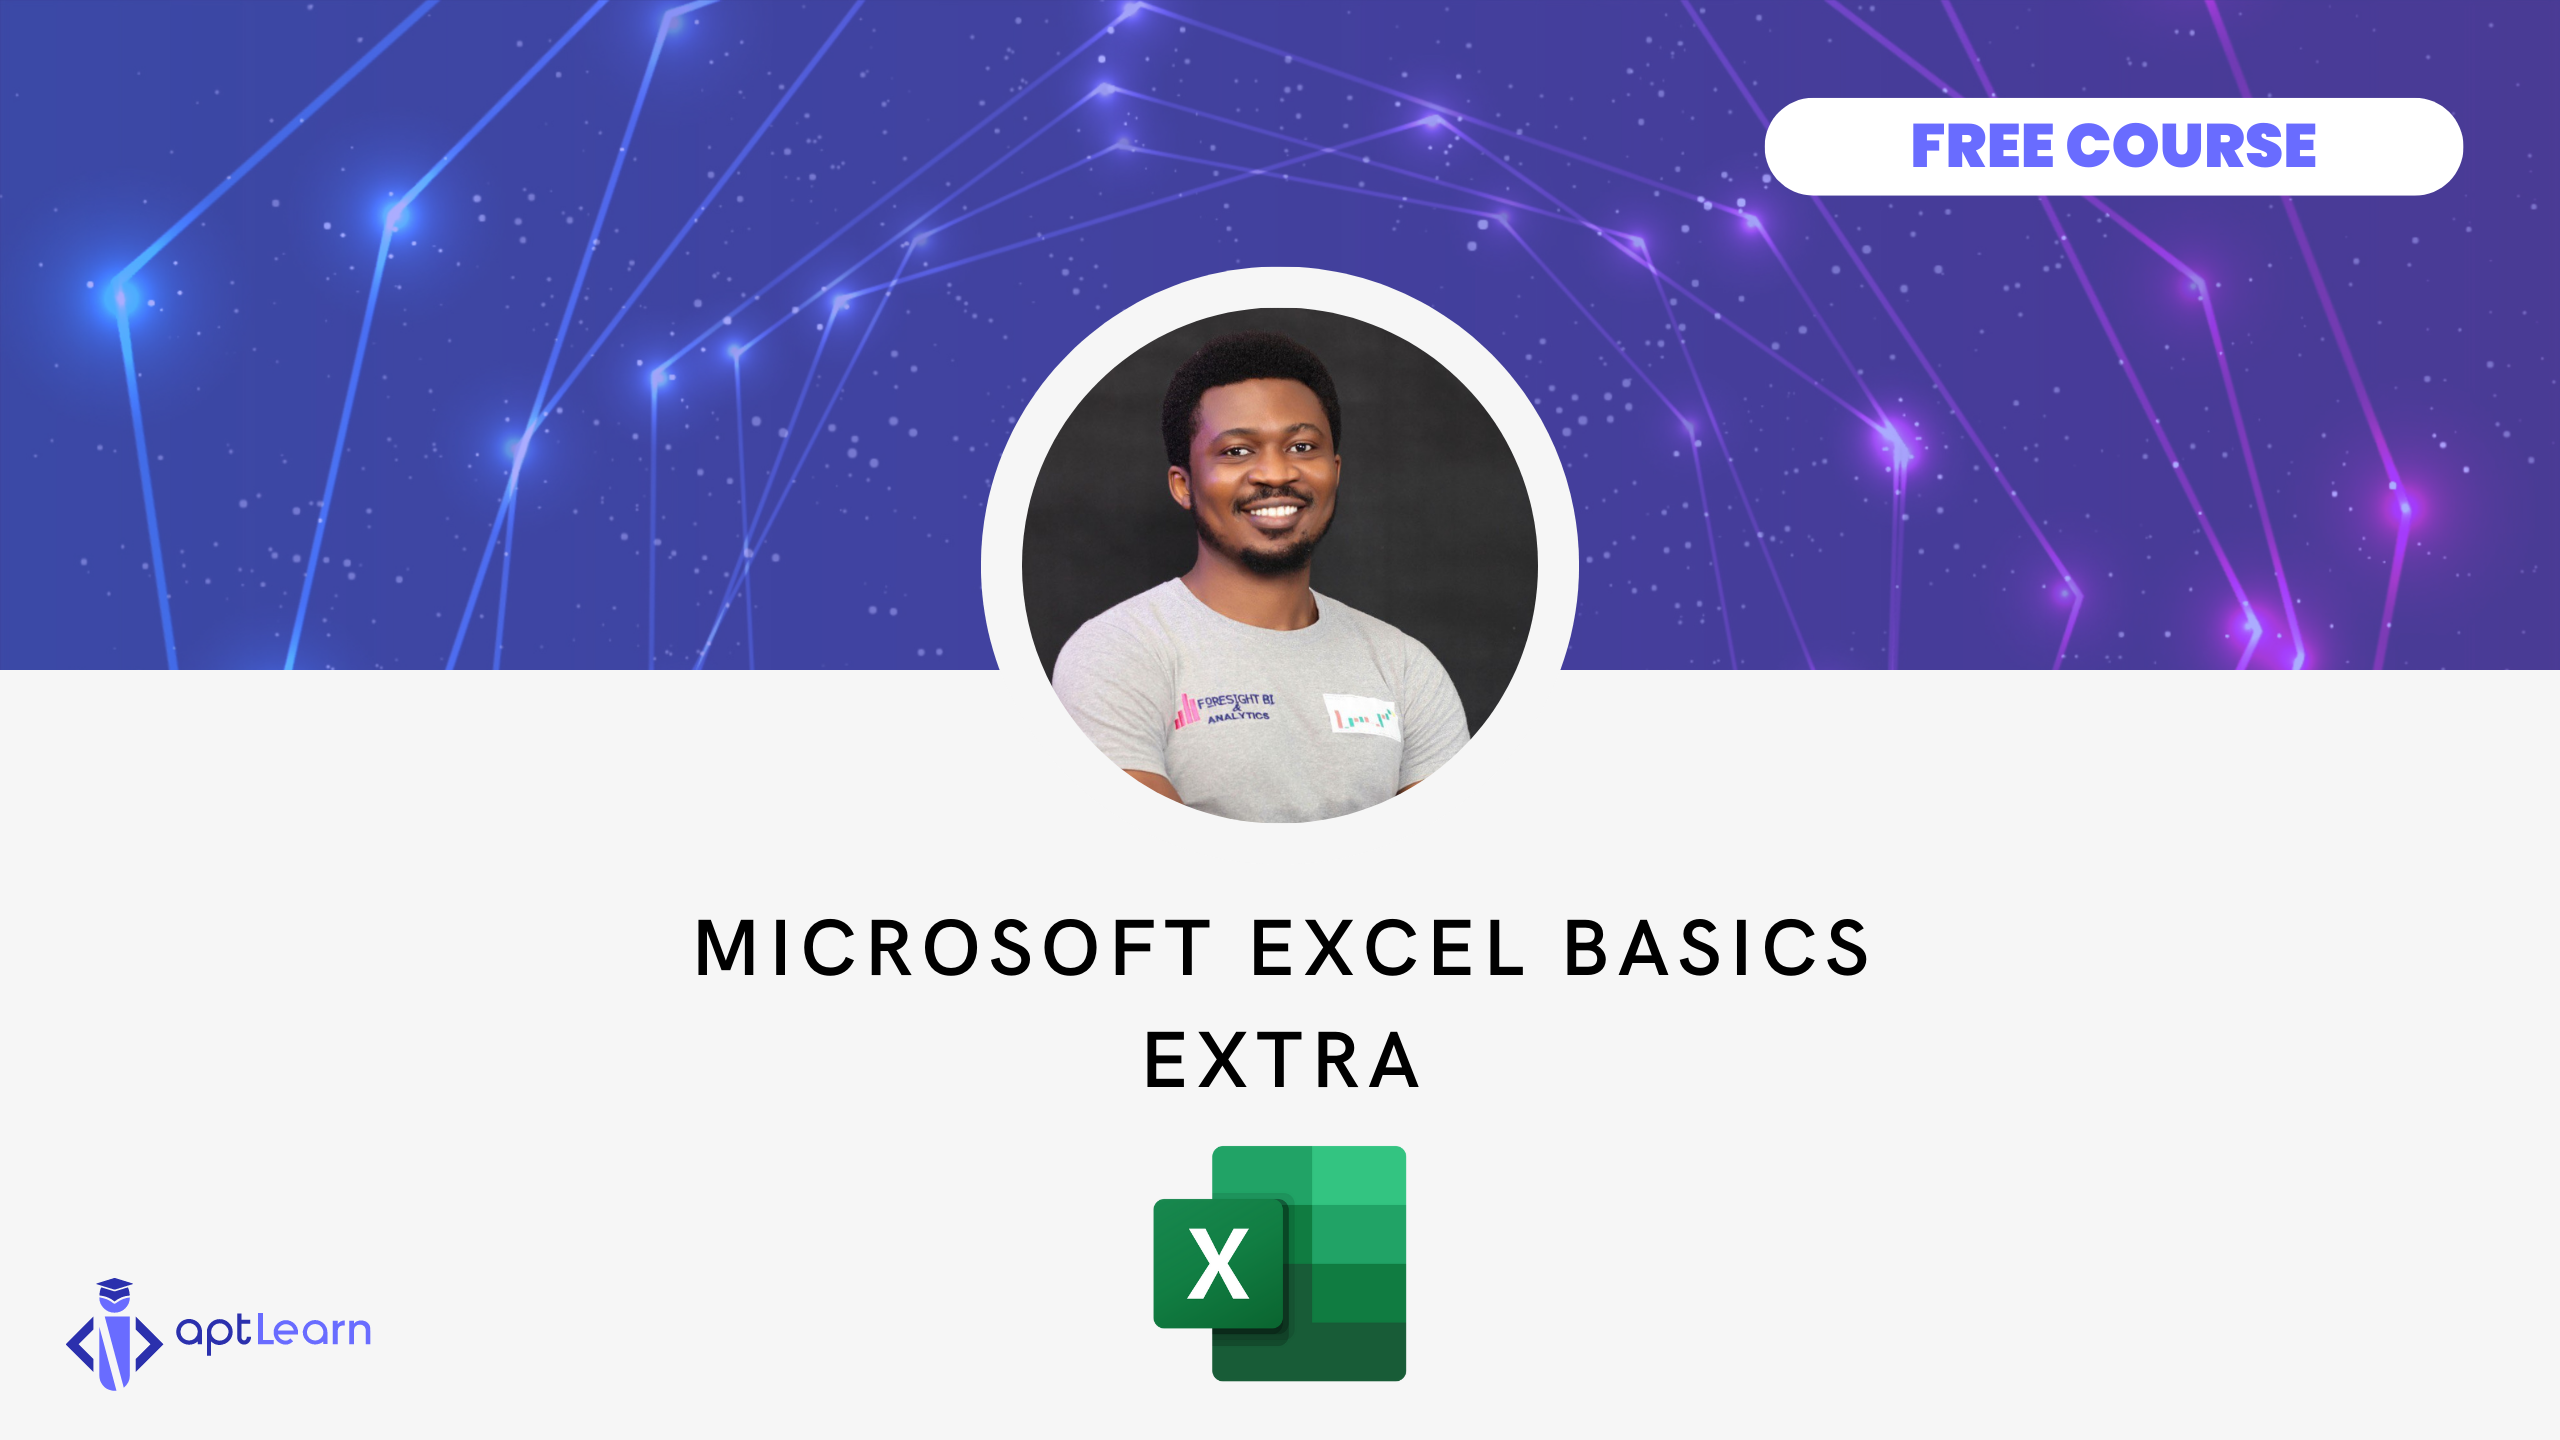 Full Course on Microsoft Excel Basics Extra